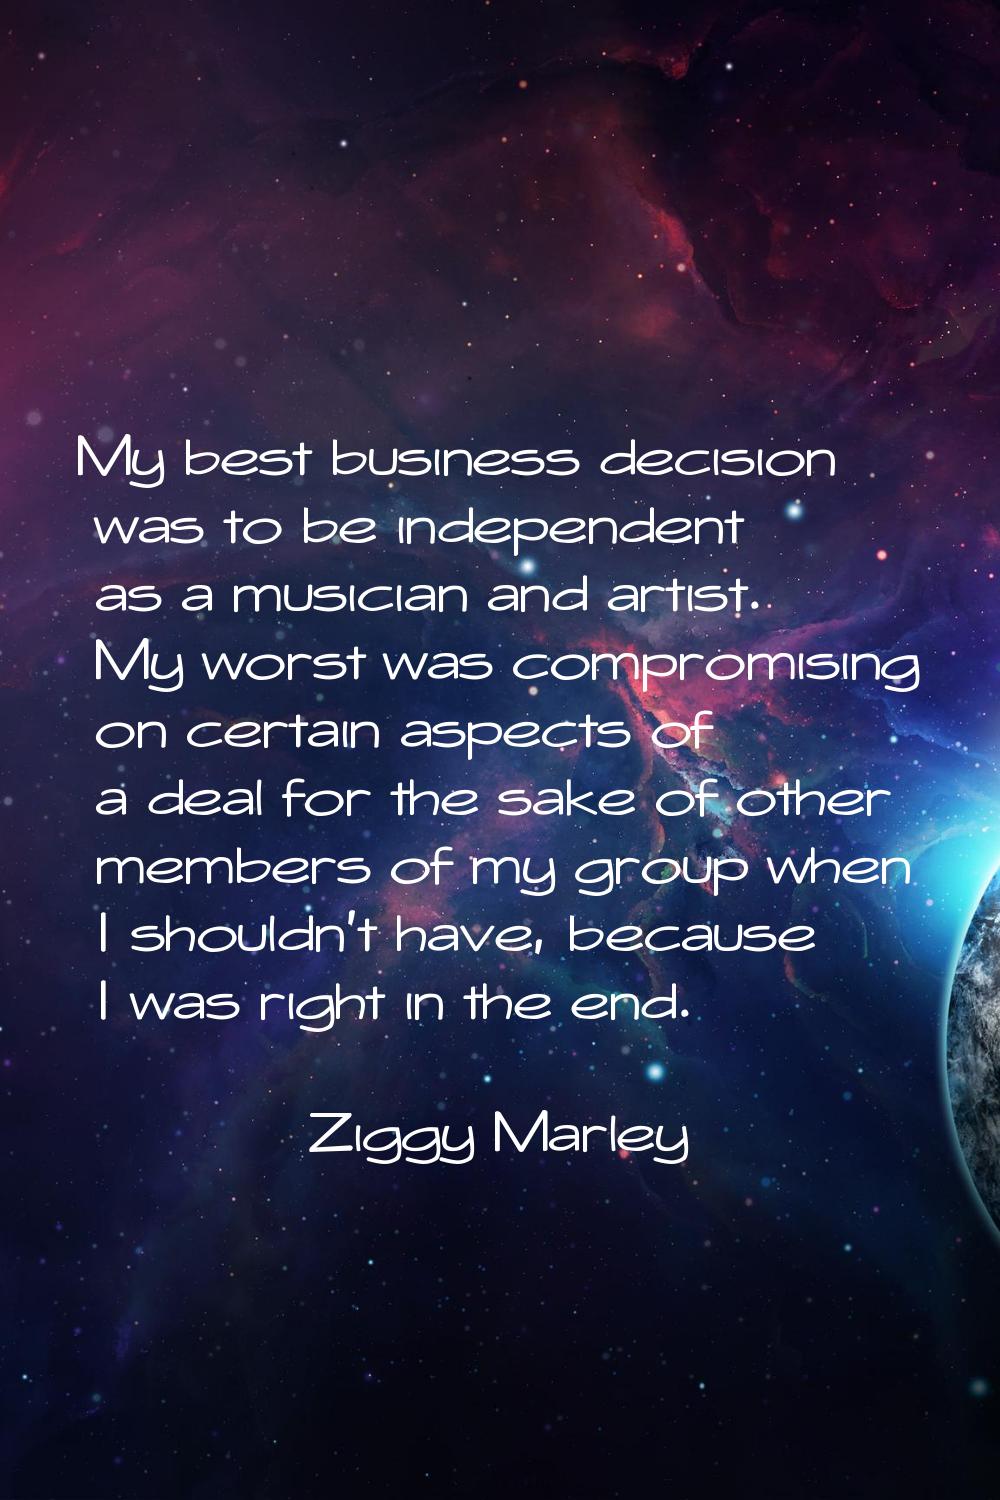 My best business decision was to be independent as a musician and artist. My worst was compromising